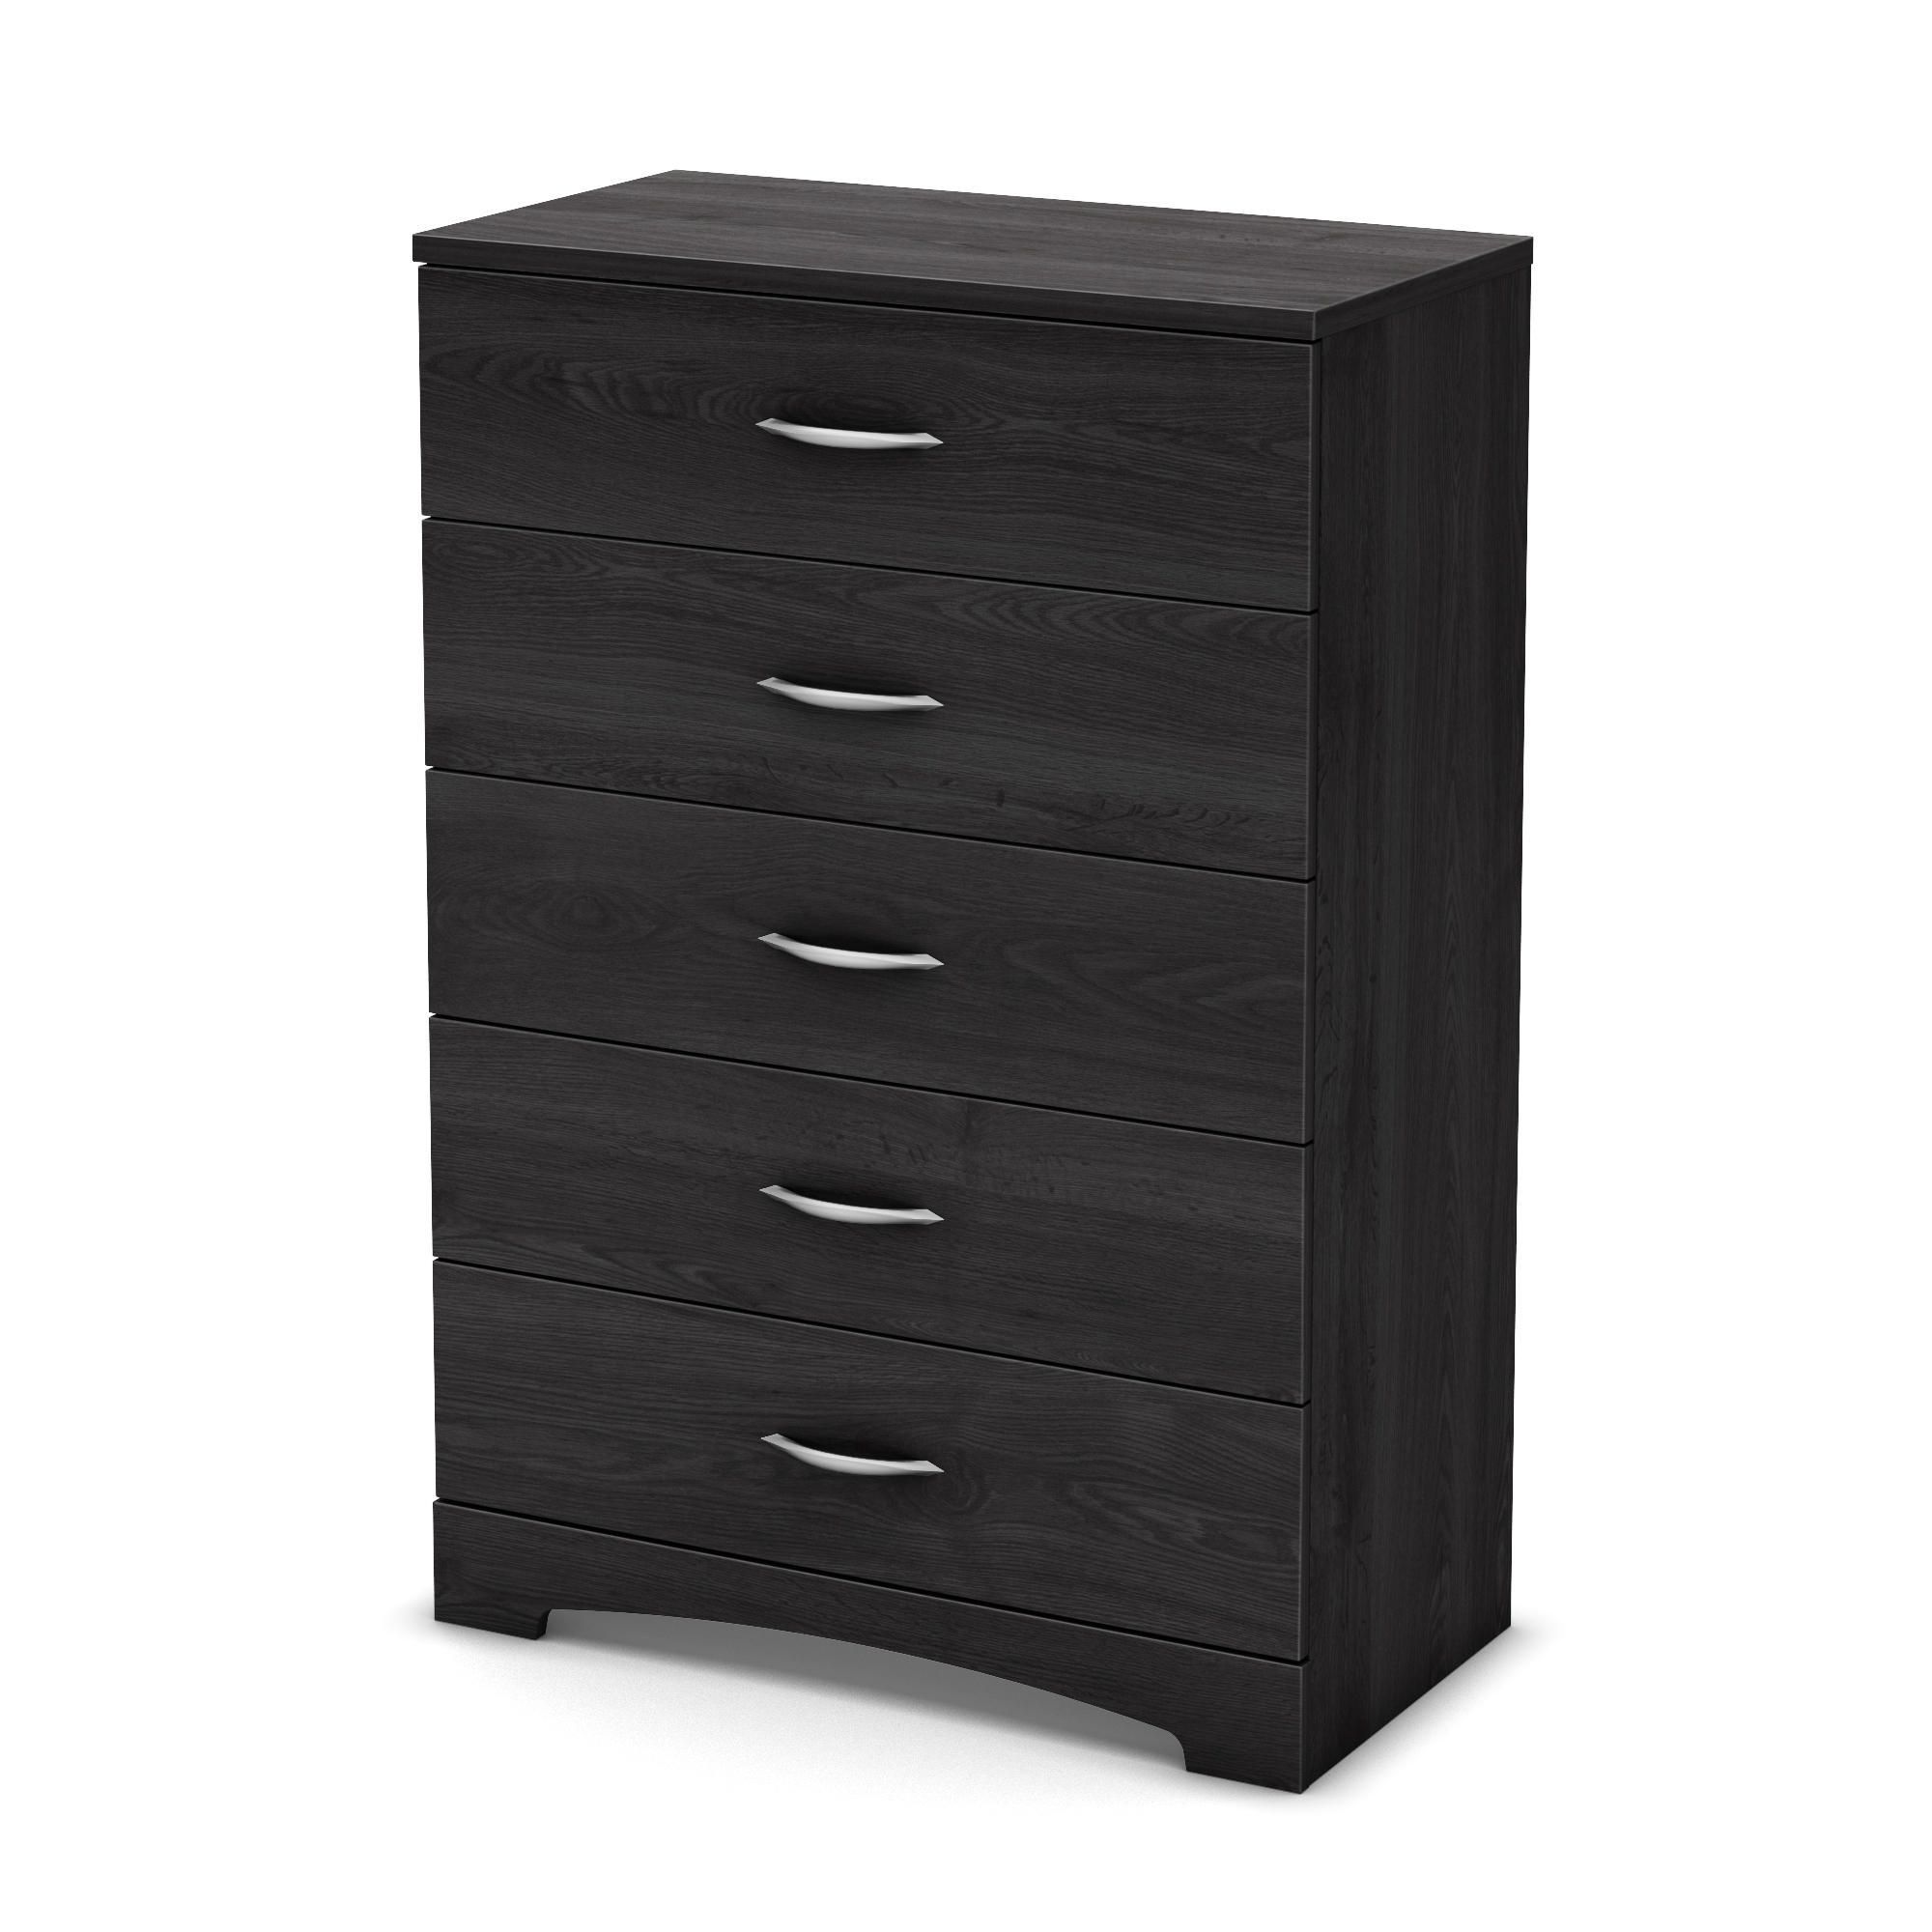 South Shore Soho Collection 5 Drawer Chest Walmart Canada